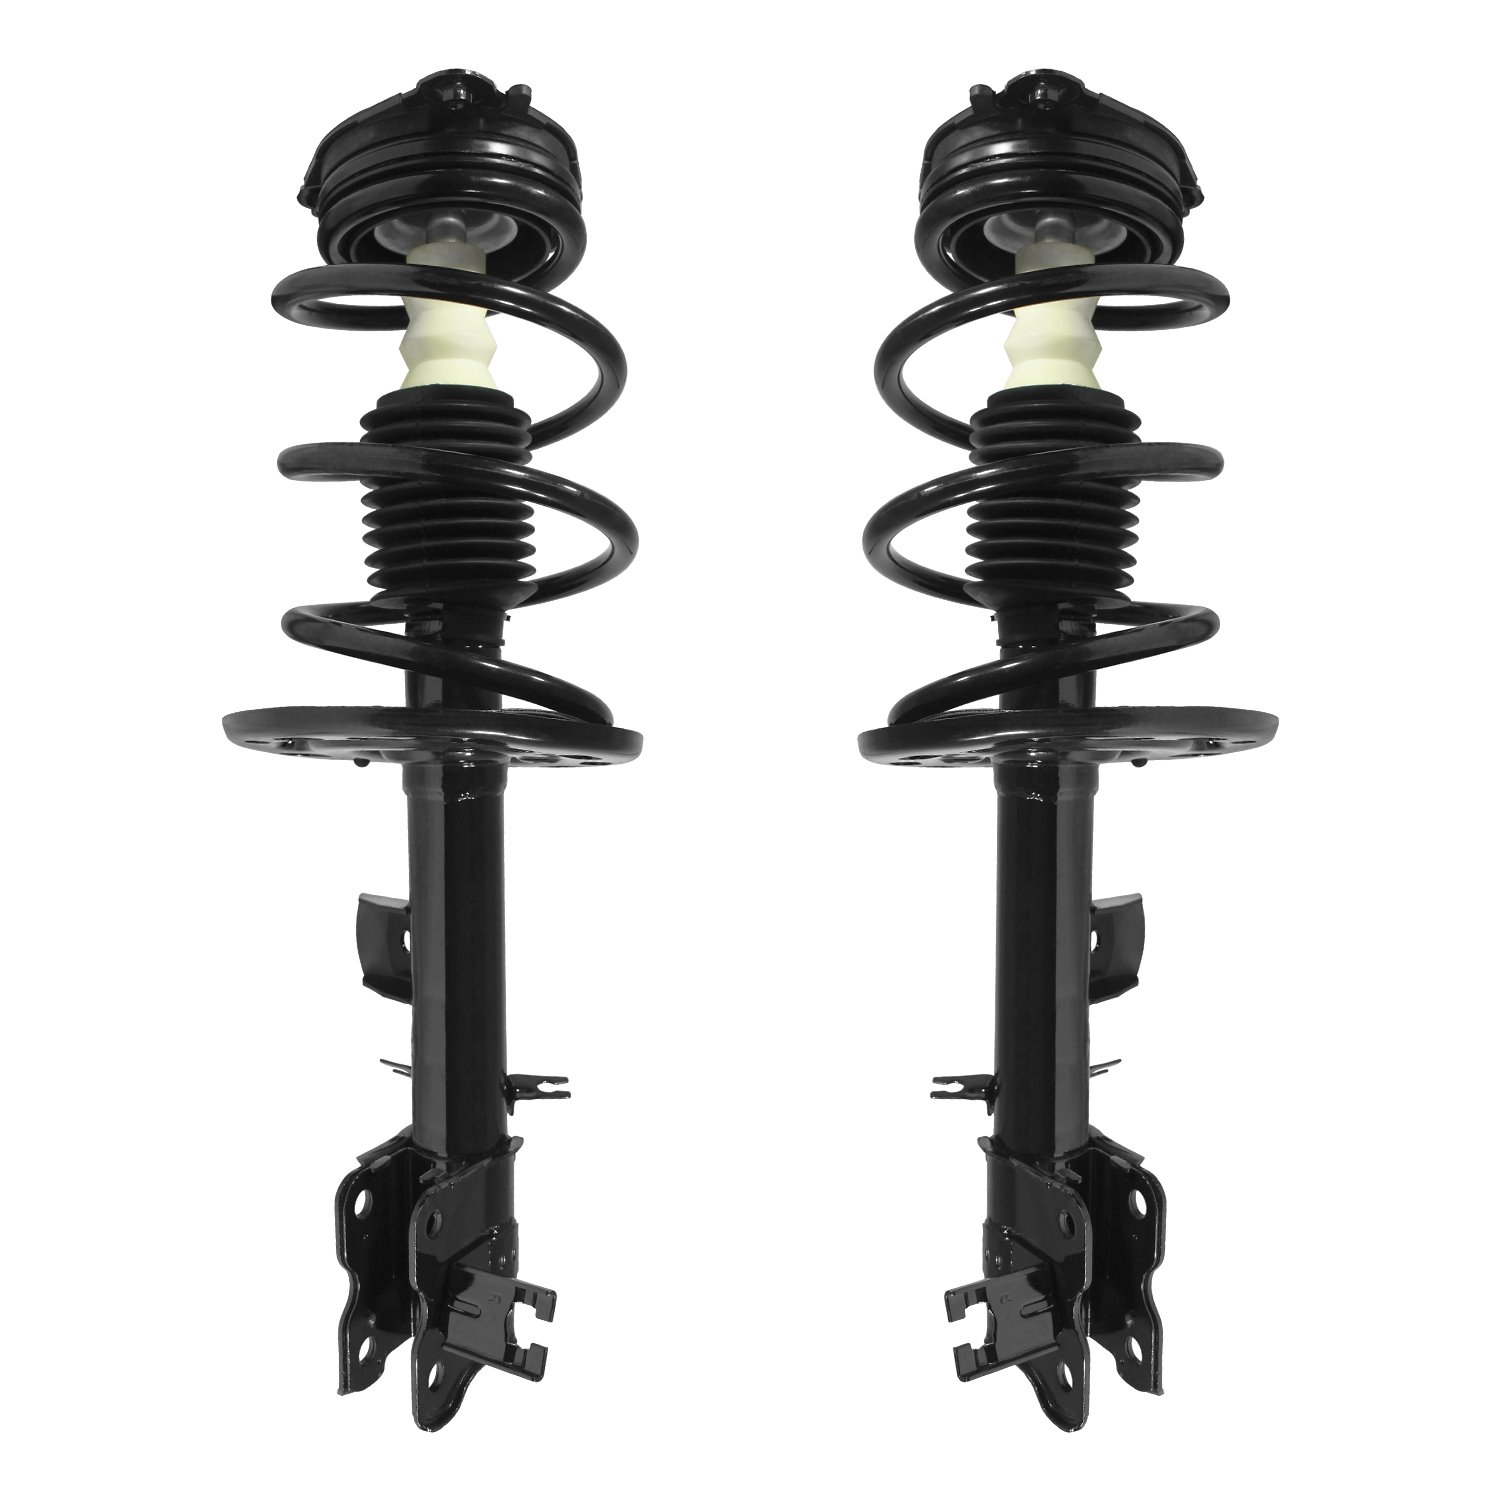 2-11763-11764-001 Suspension Strut & Coil Spring Assembly Set Fits Select Nissan Murano